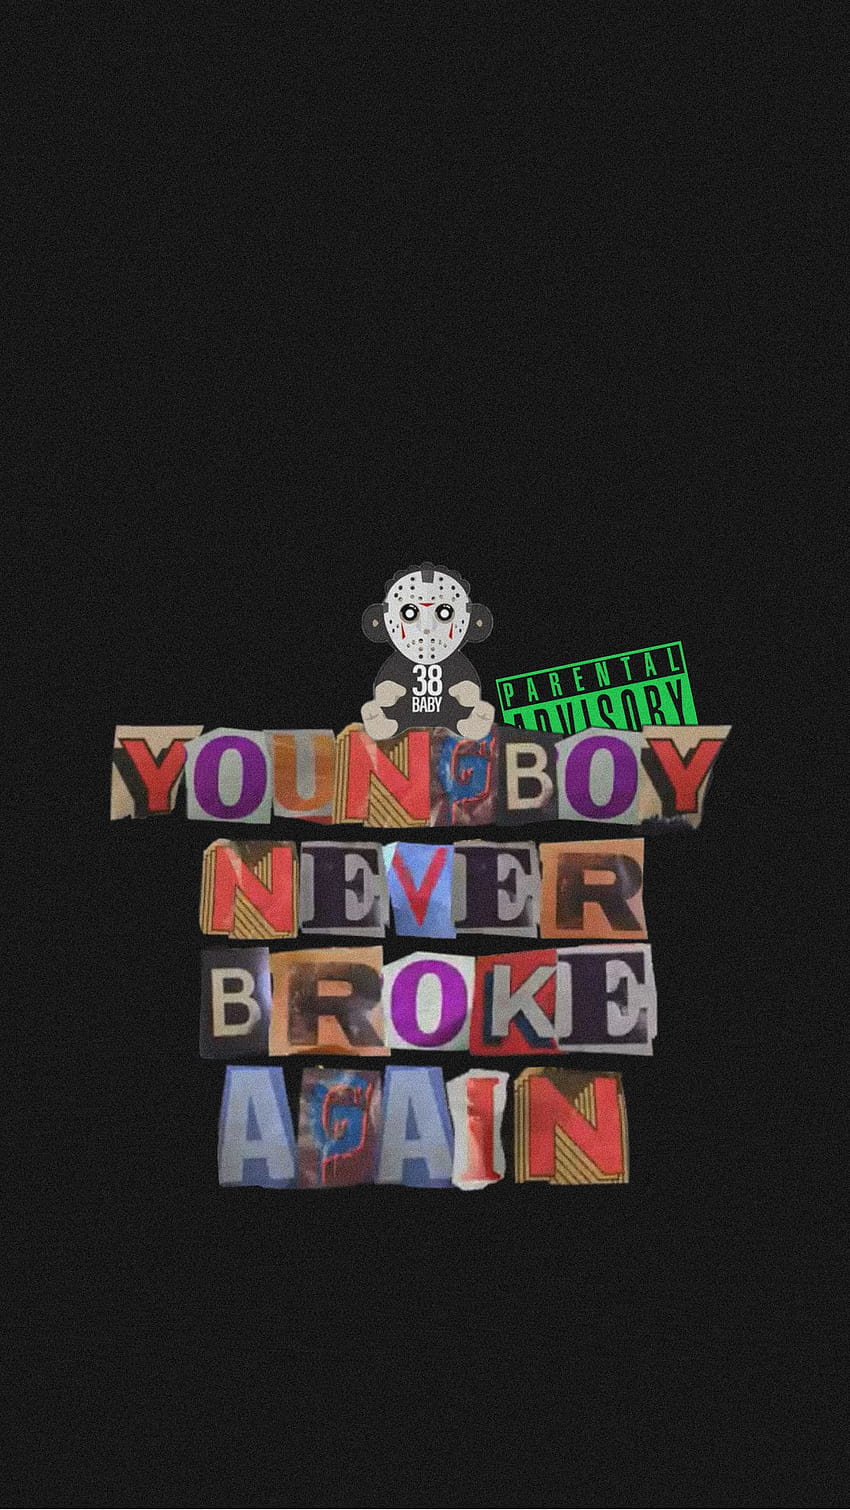 Download Youngboy Never Broke Again Bw Wallpaper | Wallpapers.com